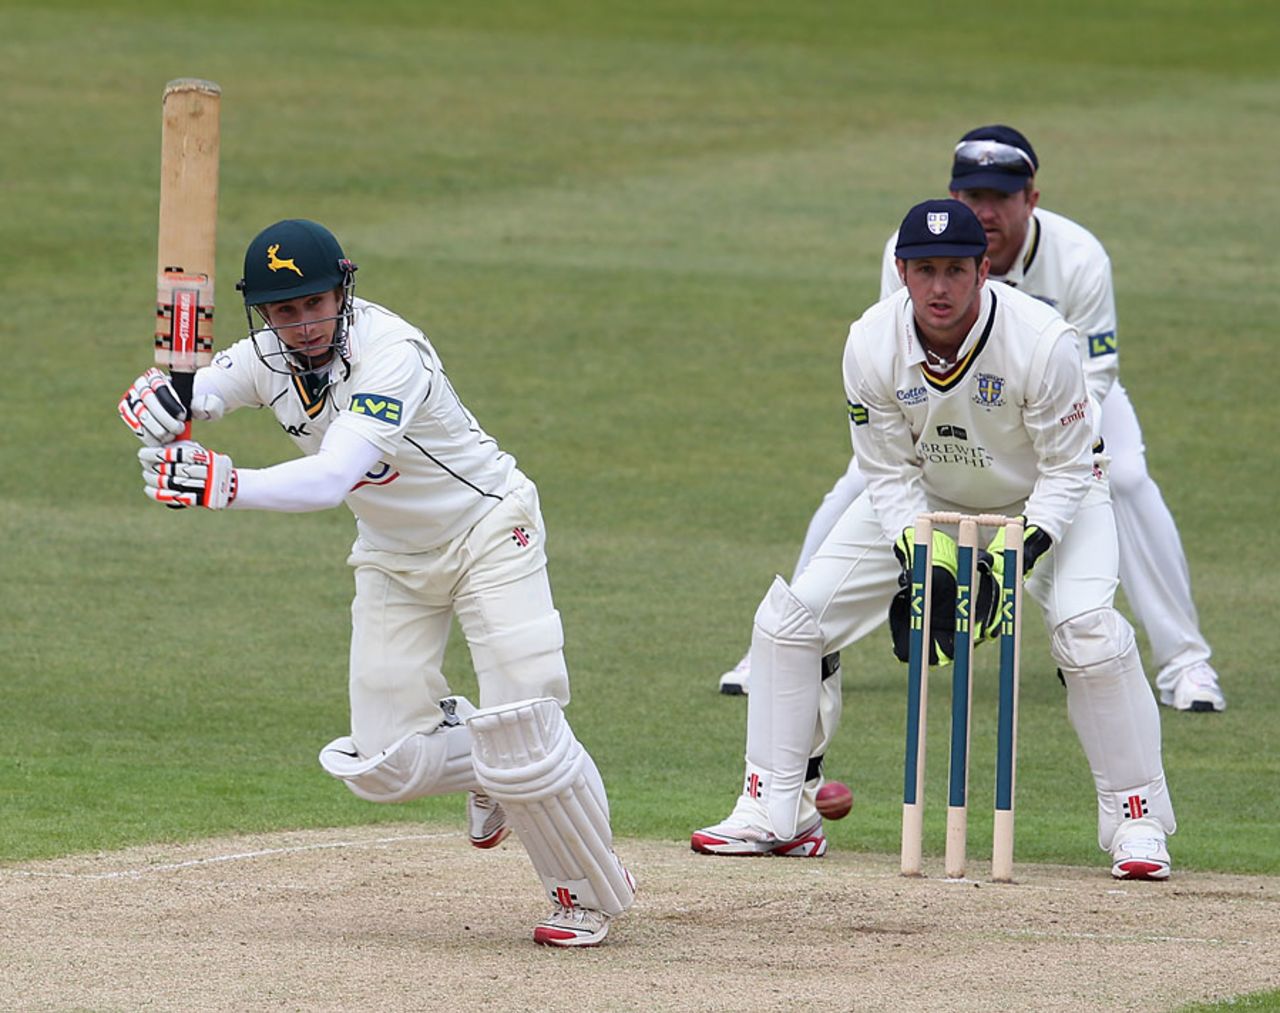 James Taylor helped steady Nottinghamshire's innings, Nottinghamshire v Durham, County Championship, Division One, Trent Bridge, 1st day, April 29, 2013